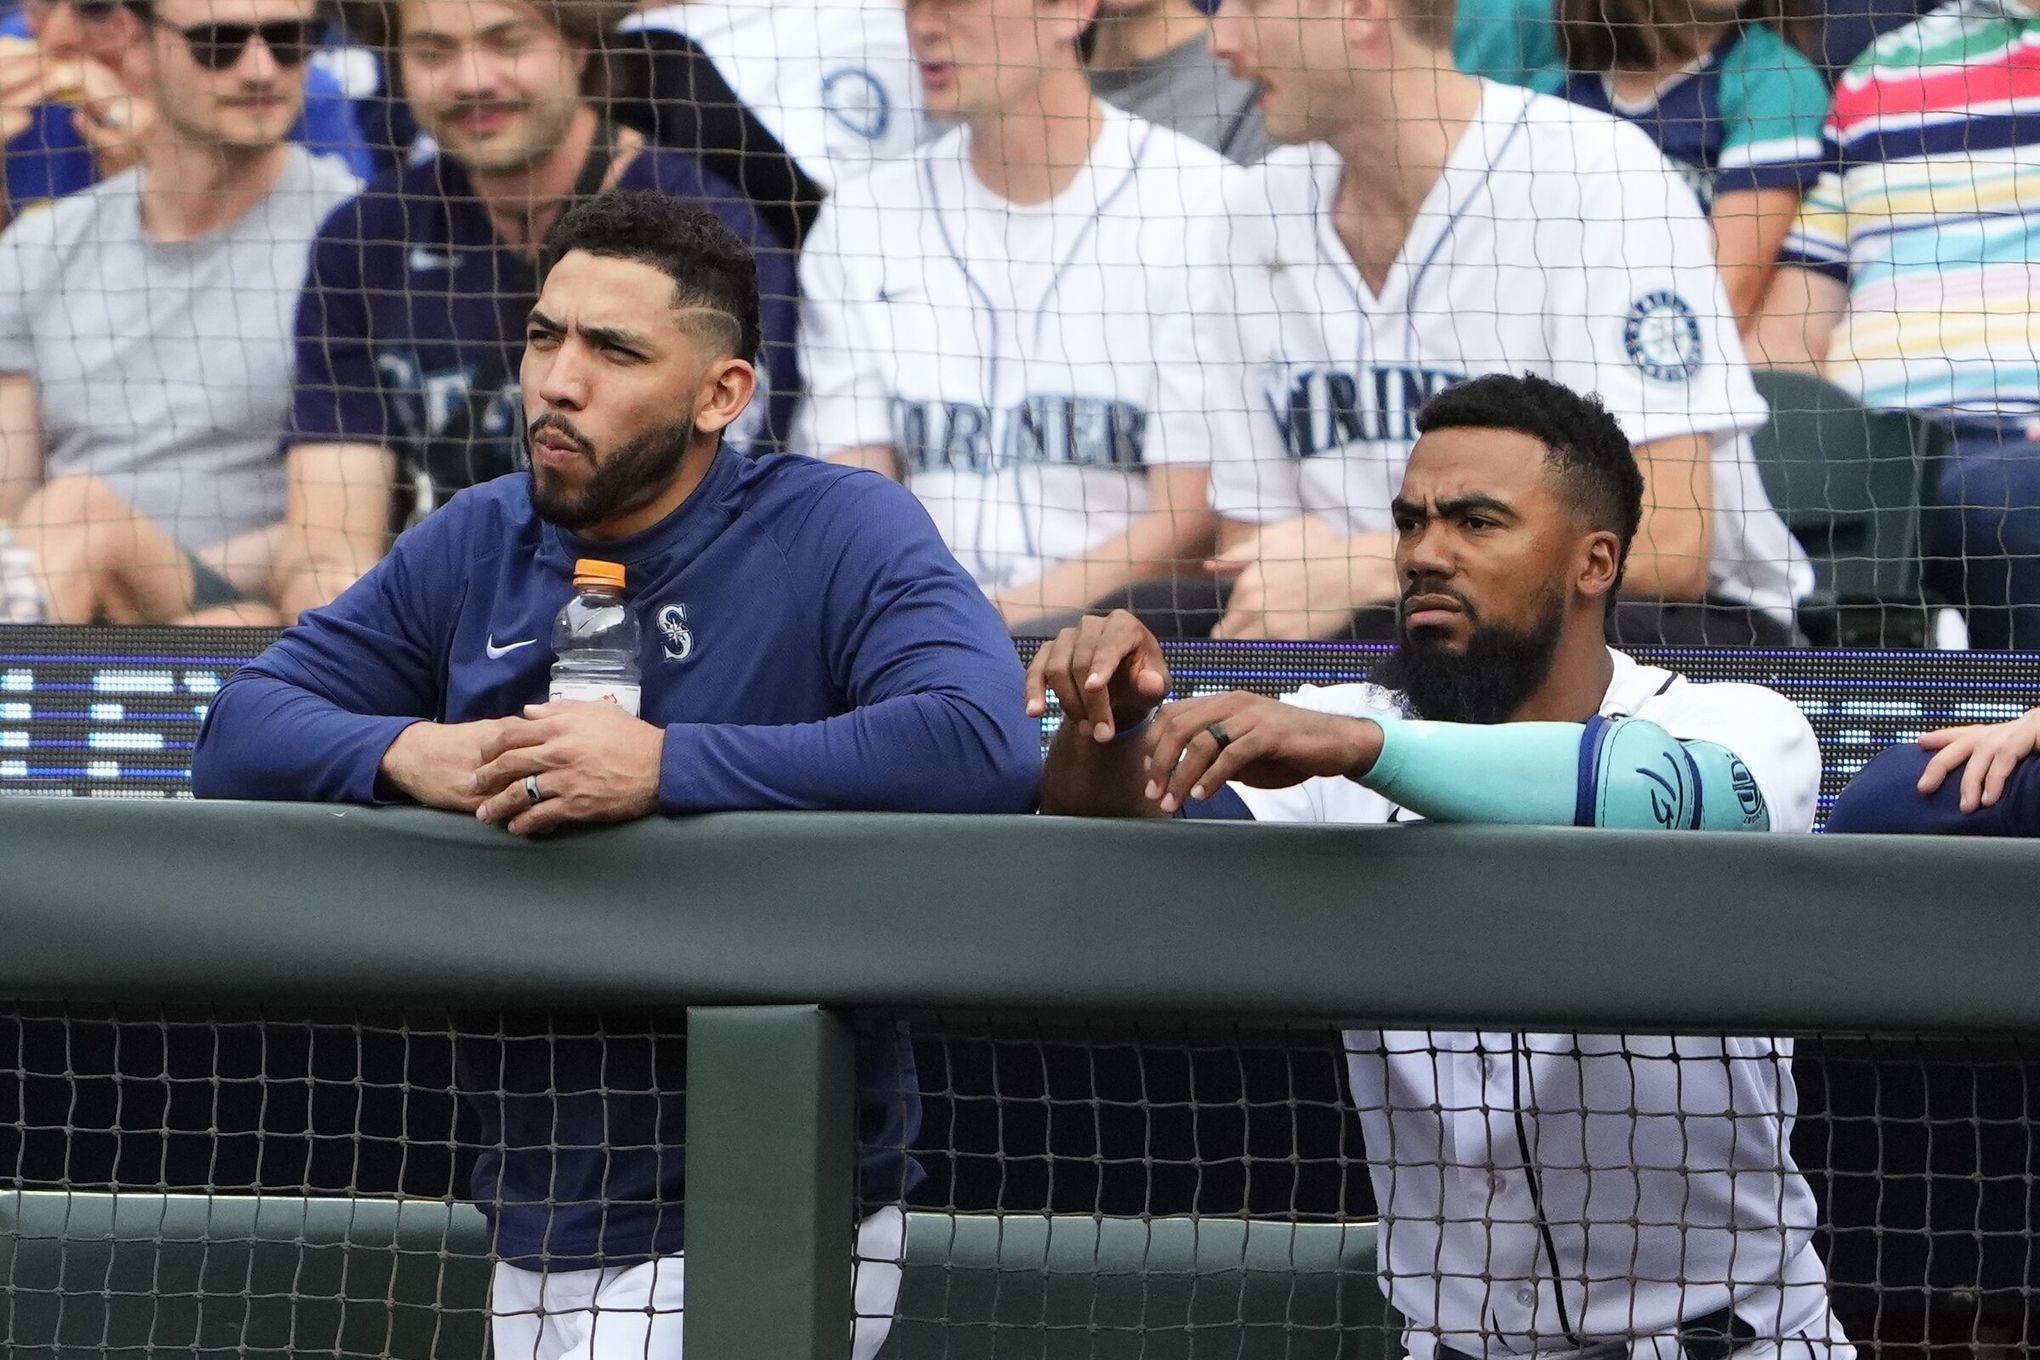 As Mariners playoff drought ends, celebration begins - Sports Illustrated